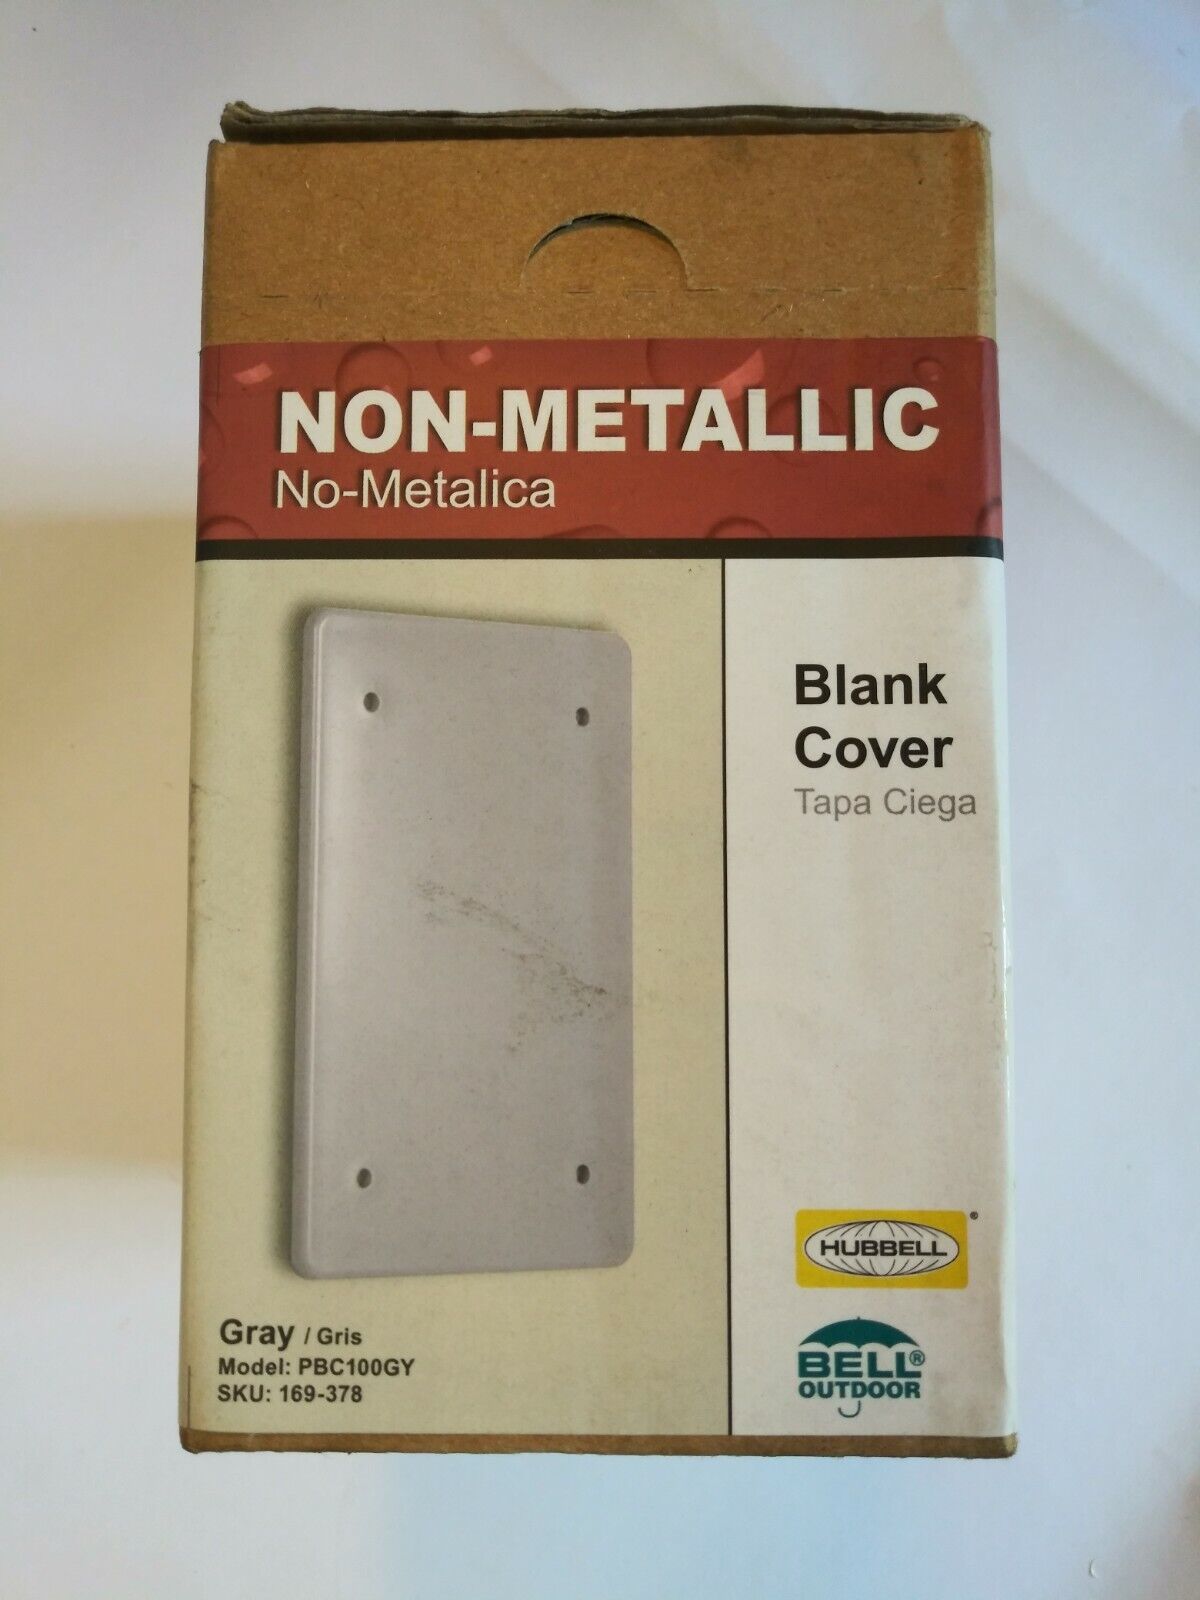 12 HUBBELL PBC100GY WEATHERPROOF NON-METALLIC BLANK COVERS 1-GANG GRAY Hubbell Bell PBC100GY